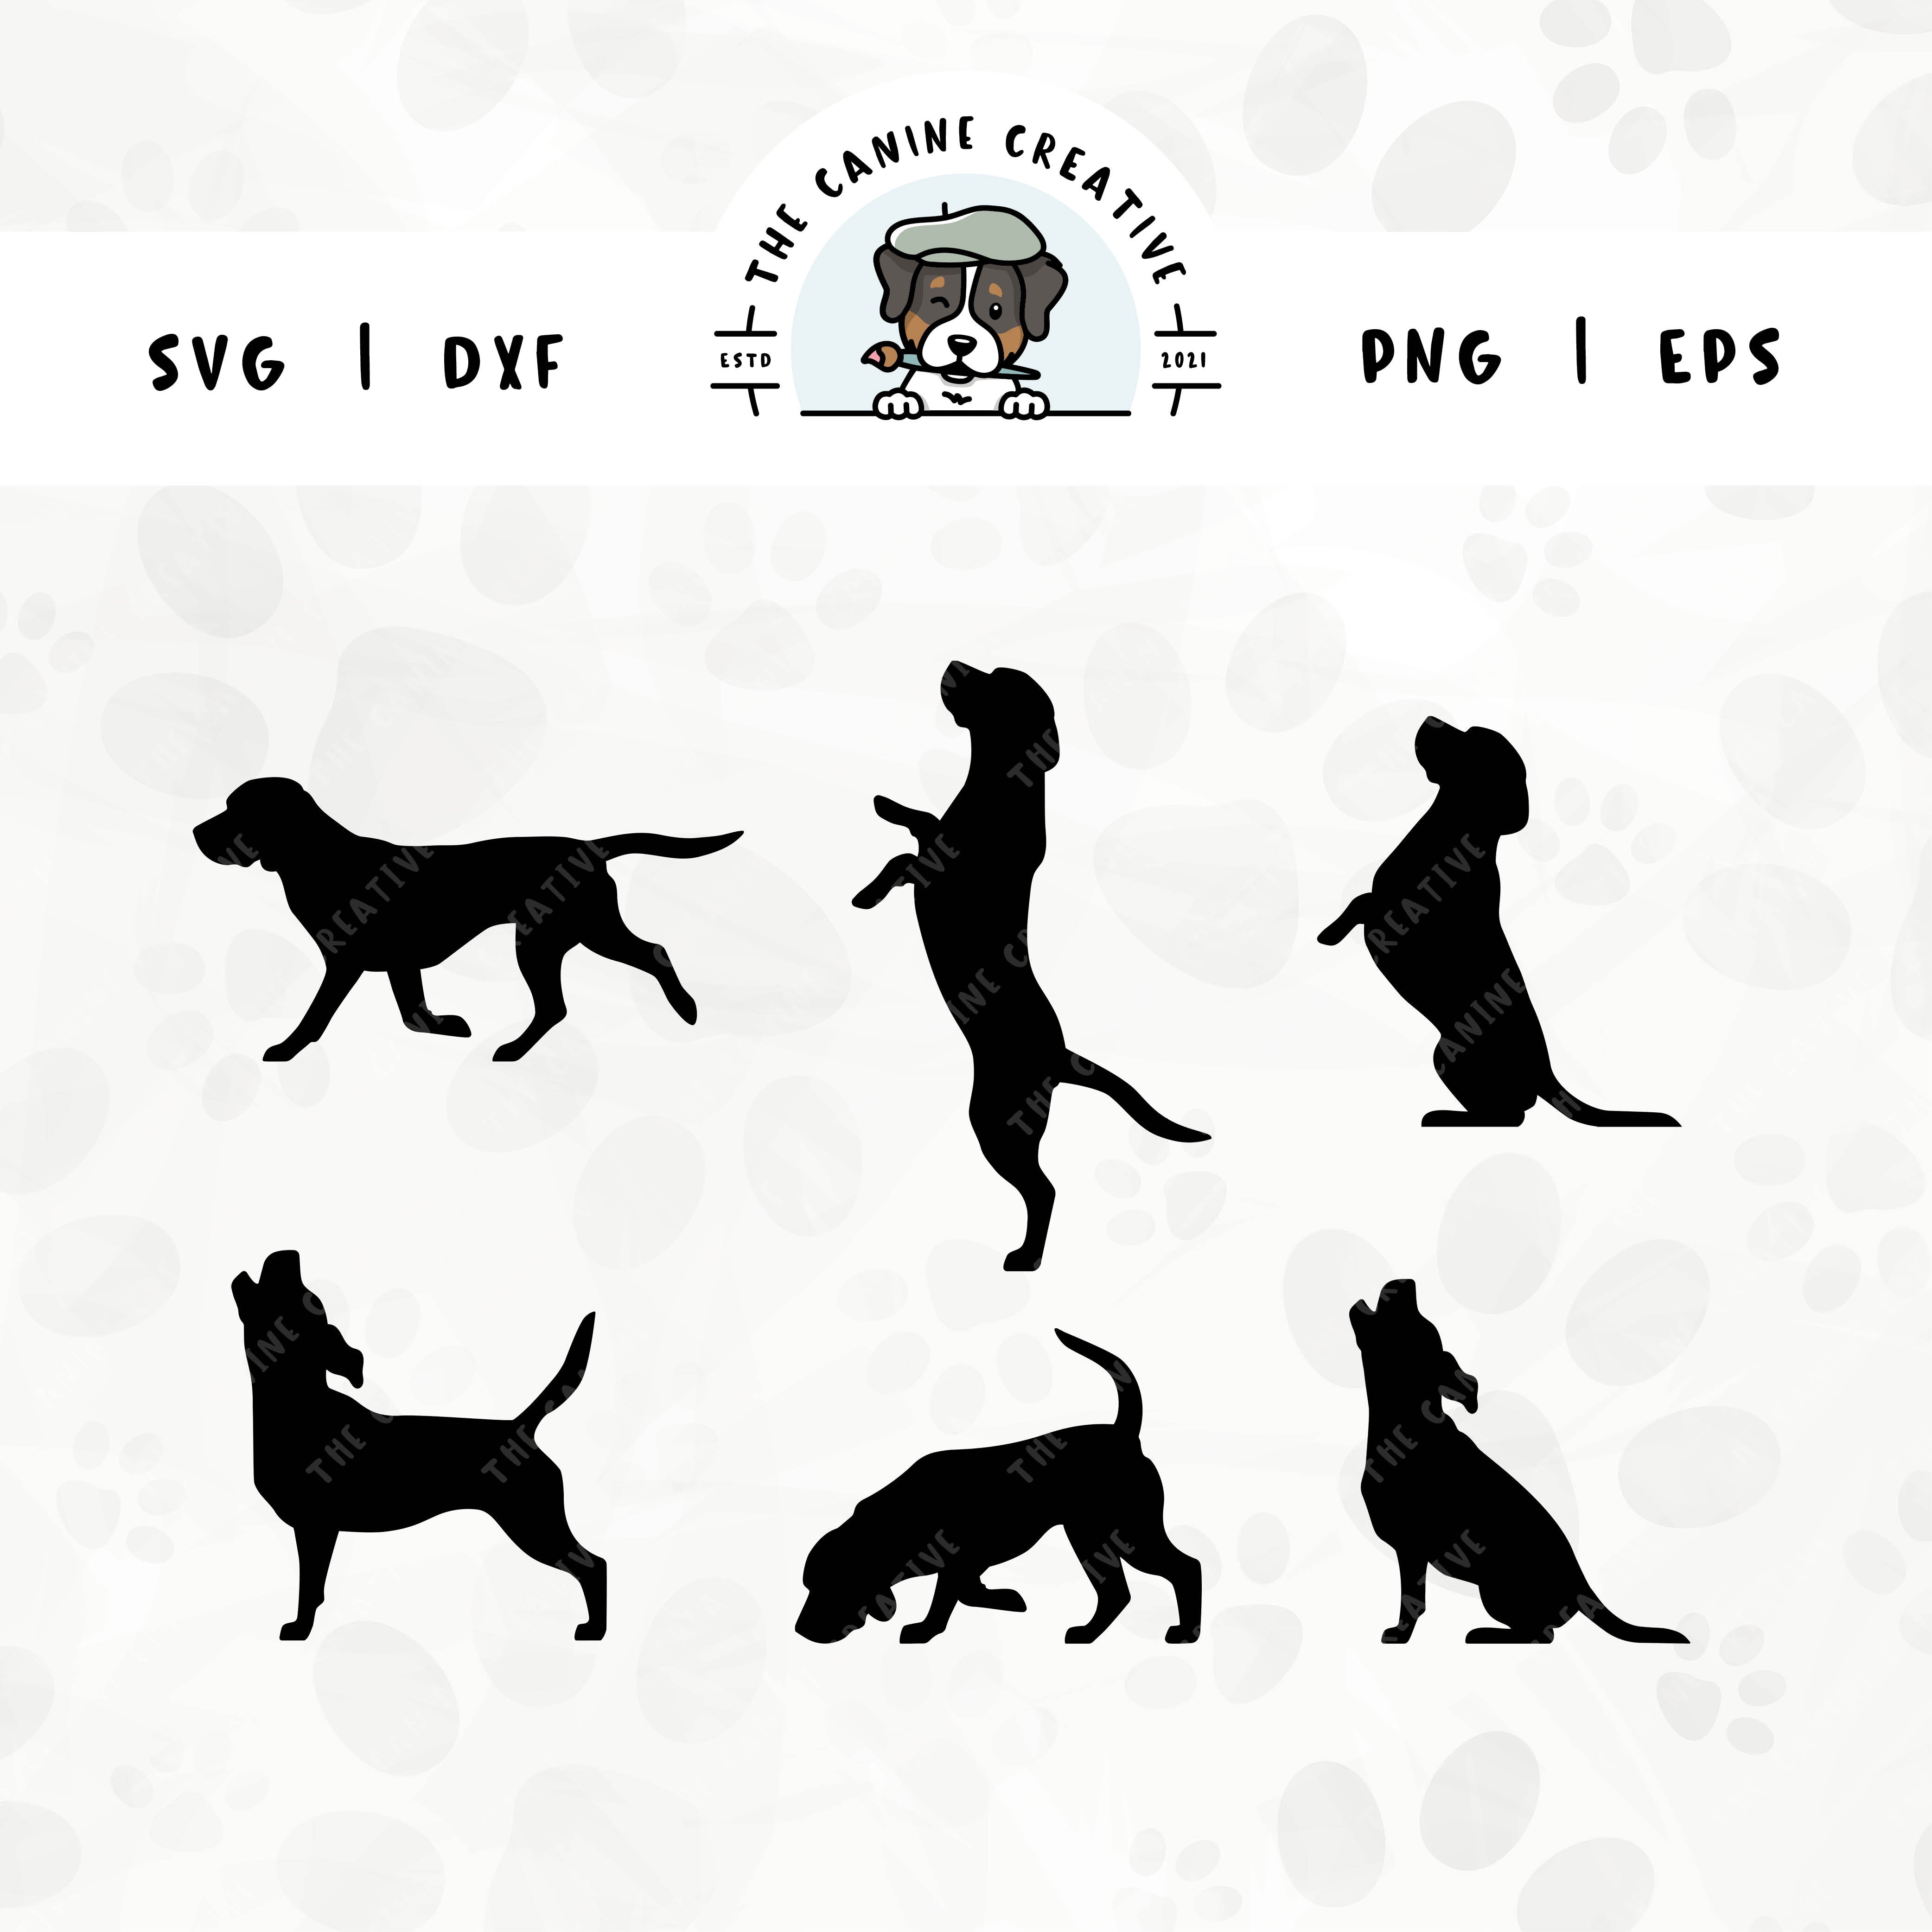 This 6-pack Beagle silhouette bundle (set 2) features various dog poses including walking, begging, jumping up, sniffing, baying, and howling. File formats include: SVG, DXF, PNG, and EPS.